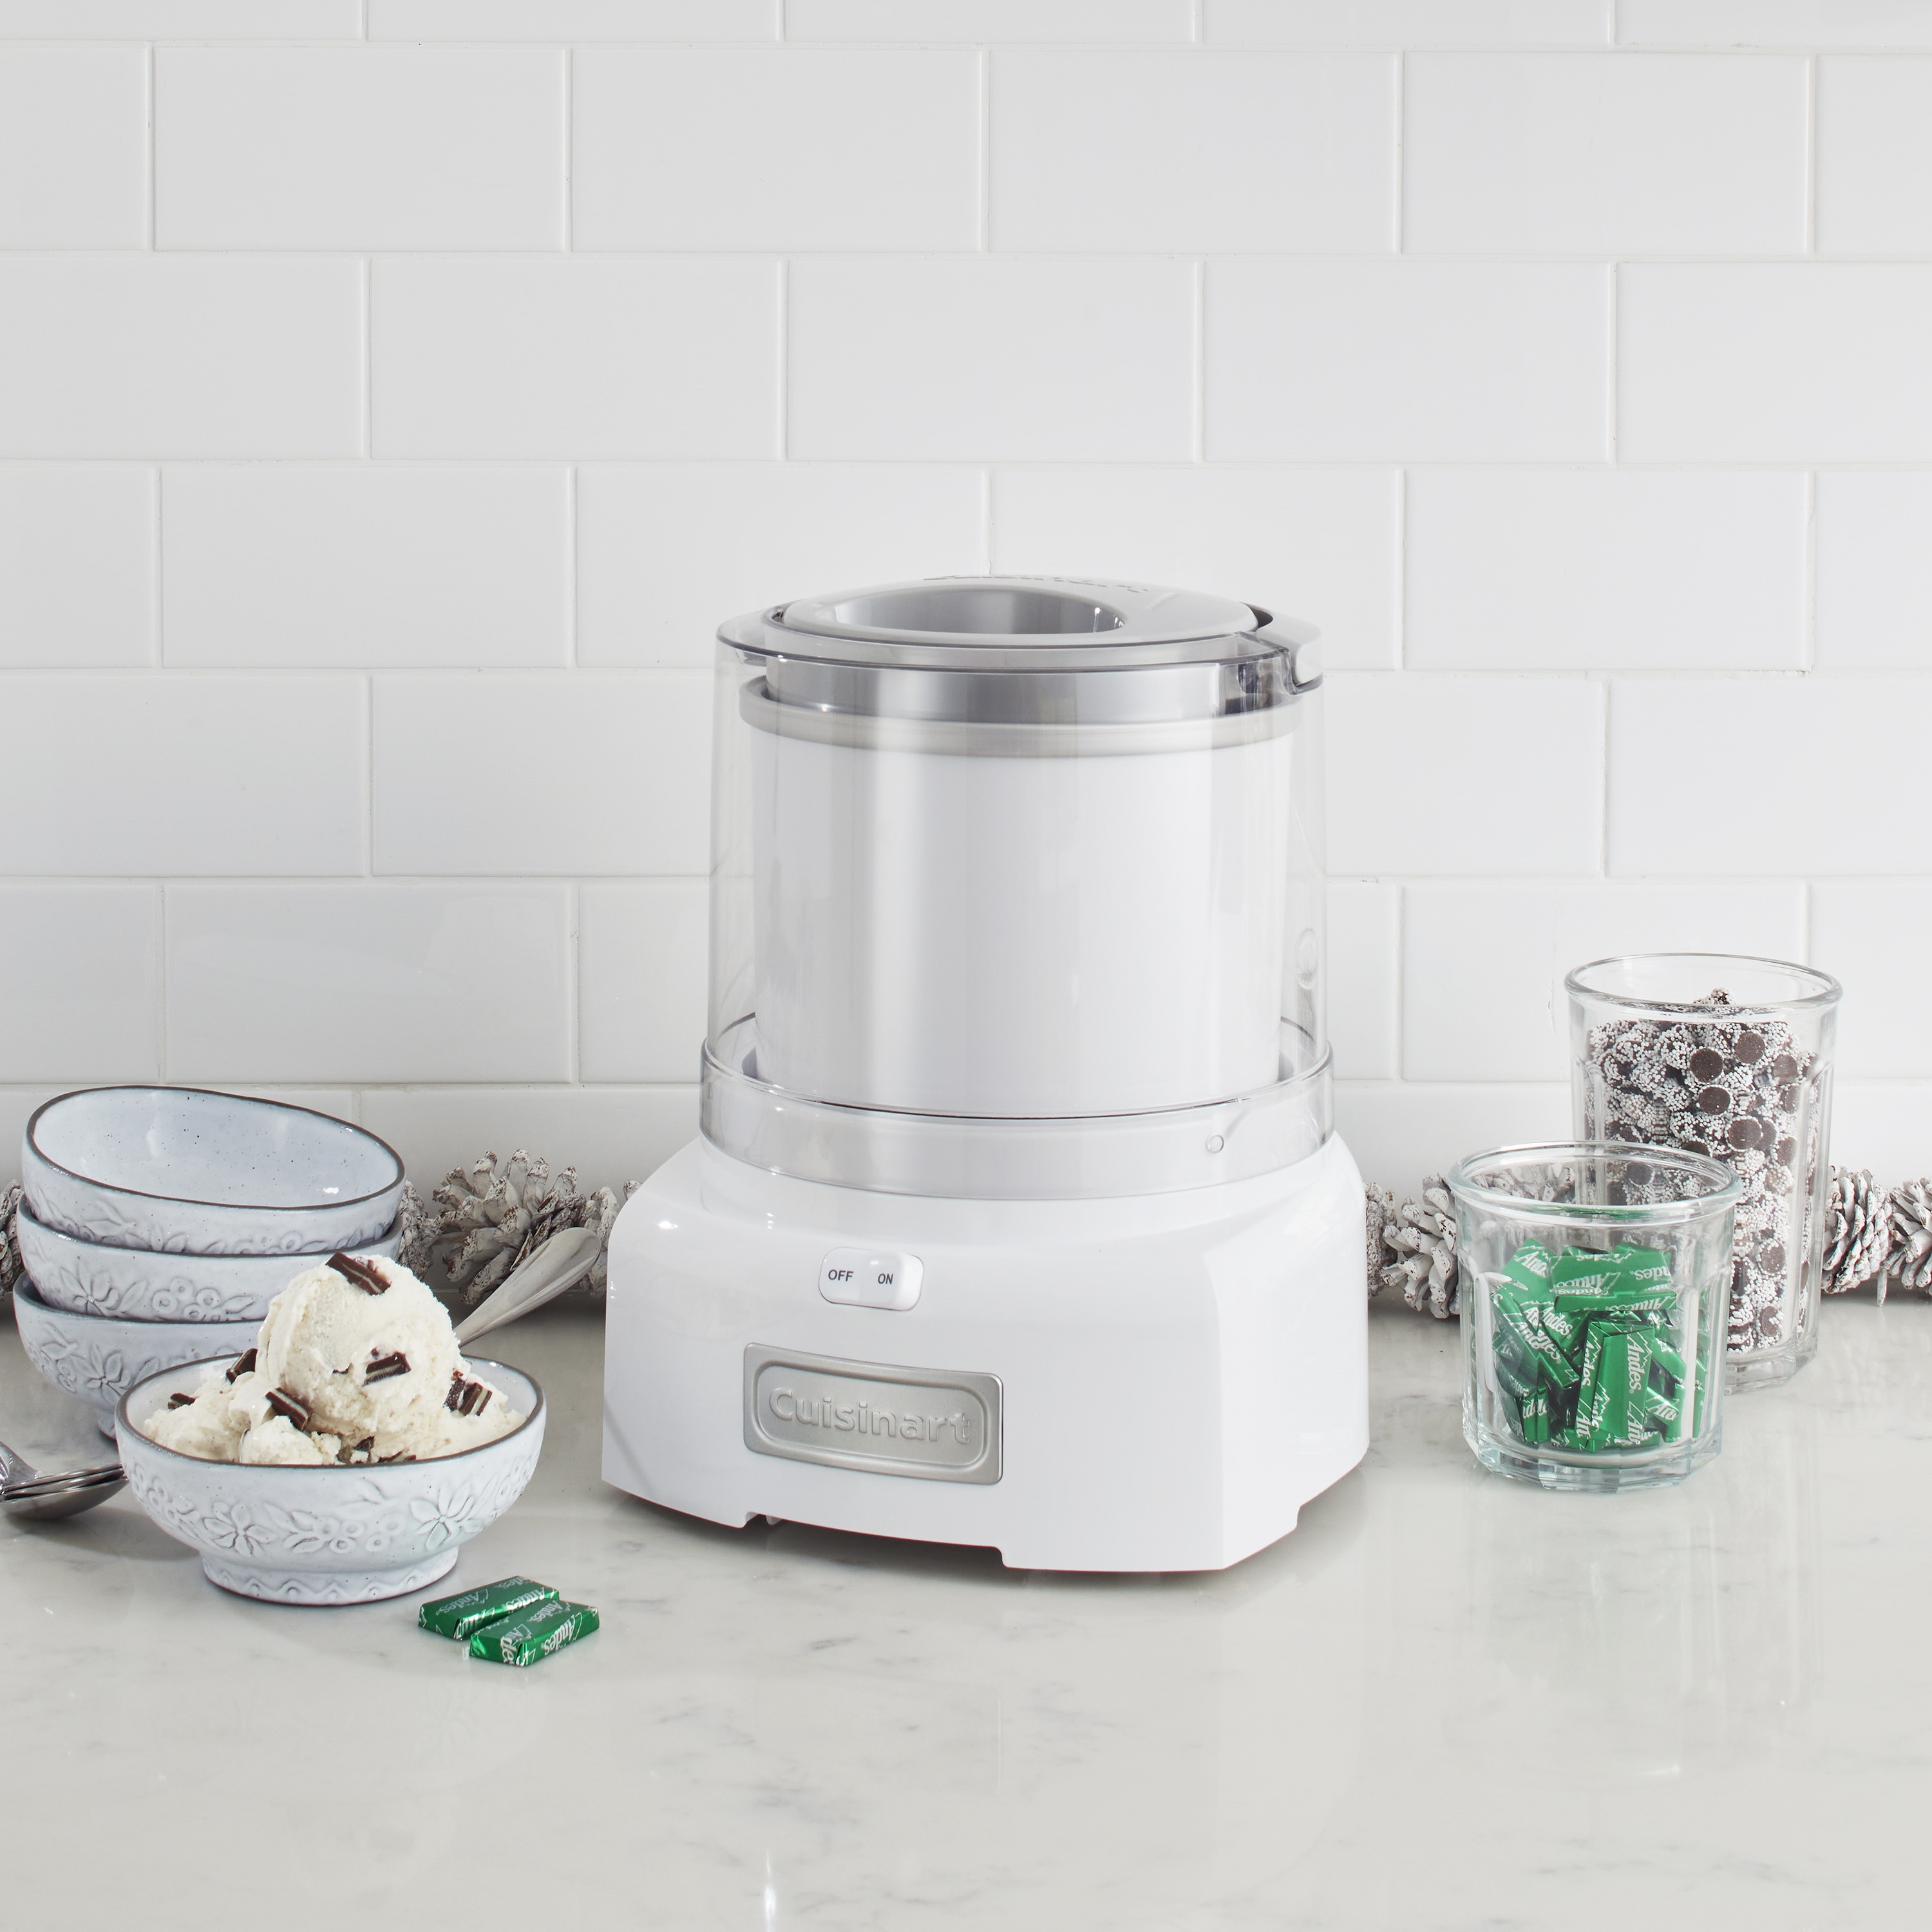 Cuisinart ICE-21R Ice Cream Maker Review: Affordable